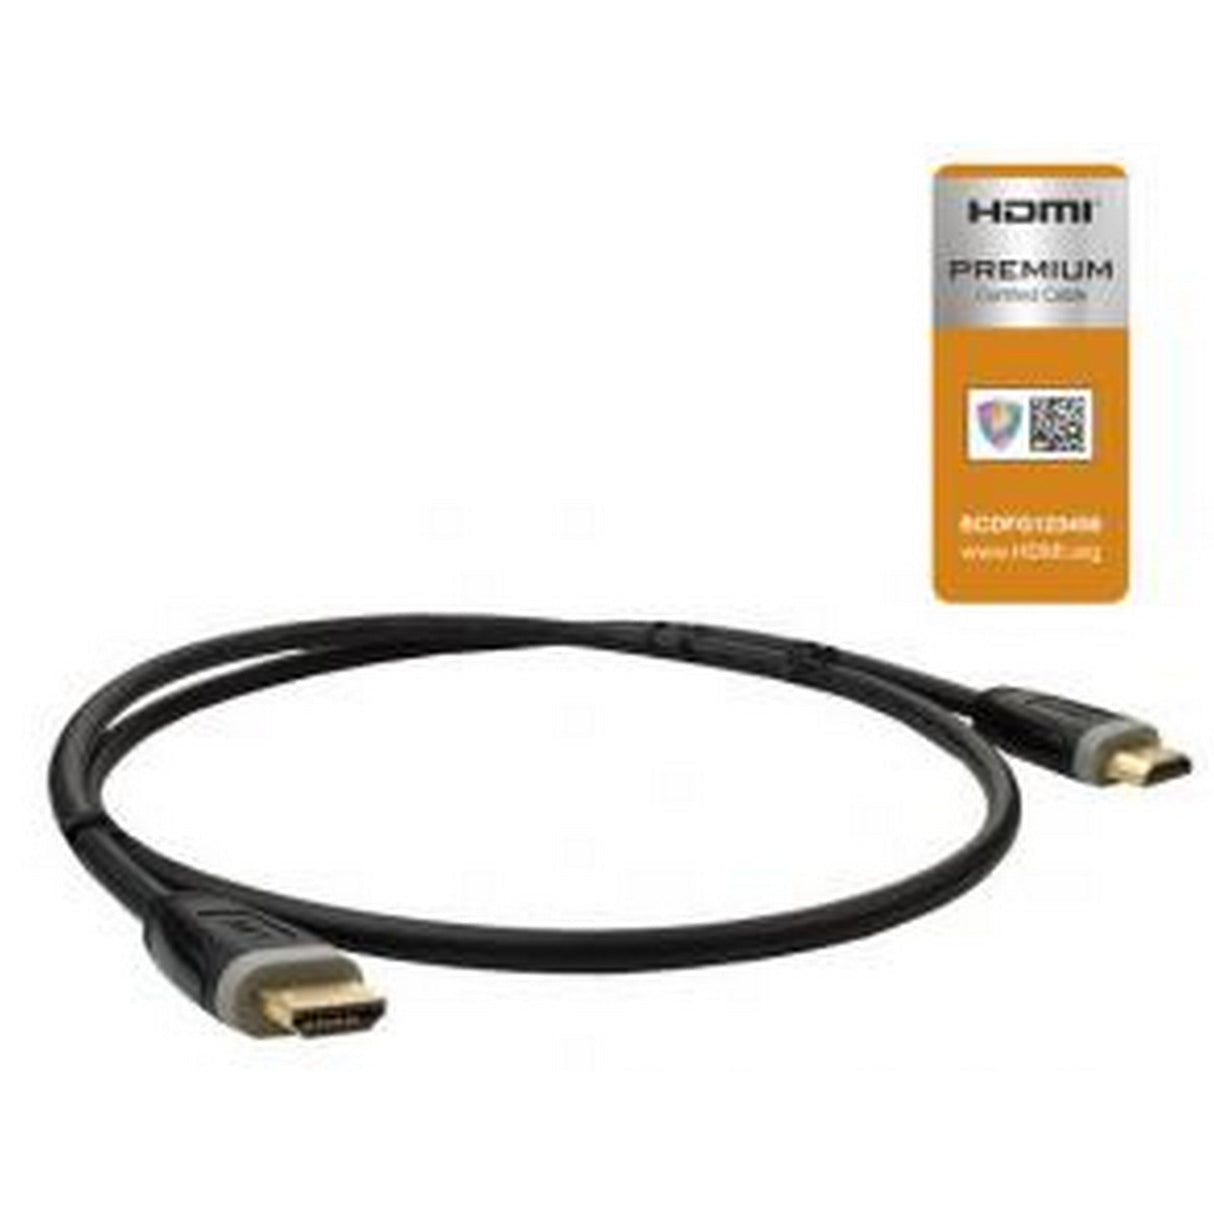 Liberty AV HDPMMF HDMI Premium Certified Cable Assembly